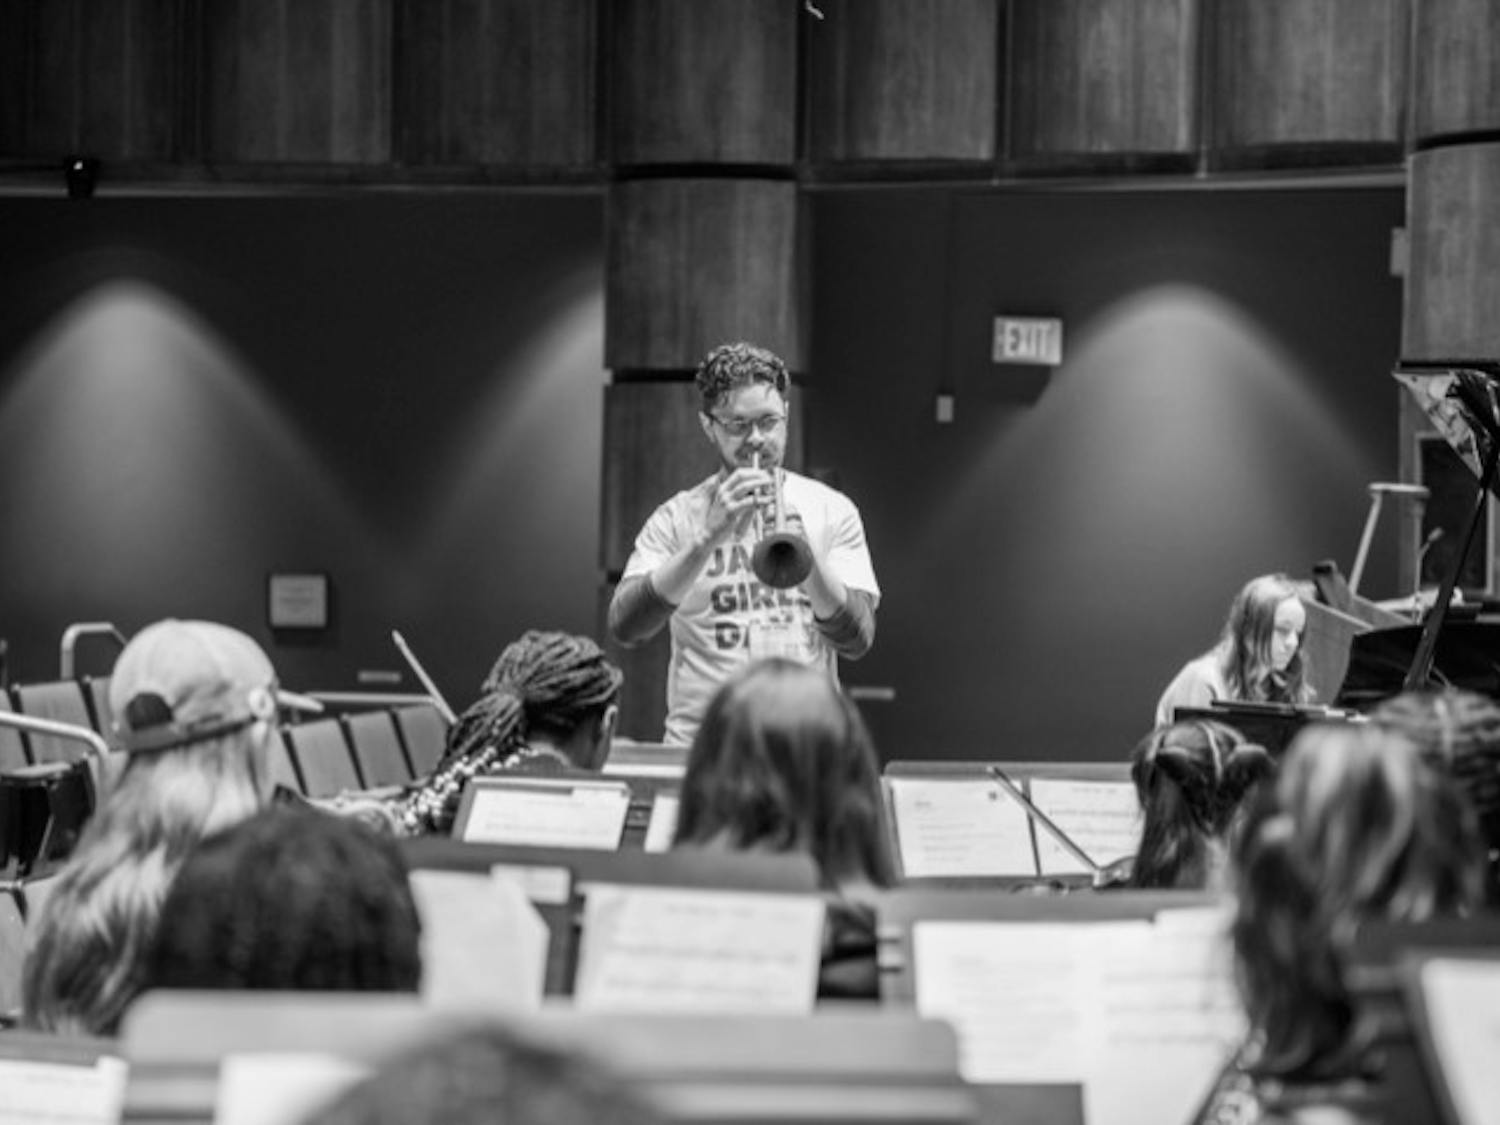 Associate professor of jazz studies Dr. Matt White lets the music flow from his instrument during Jazz Girls Day on Jan. 14, 2023, at the University of South Carolina’s School of Music. The next Jazz Girls Day will be held on April 22, 2023, in Charleston, South Carolina.&nbsp;